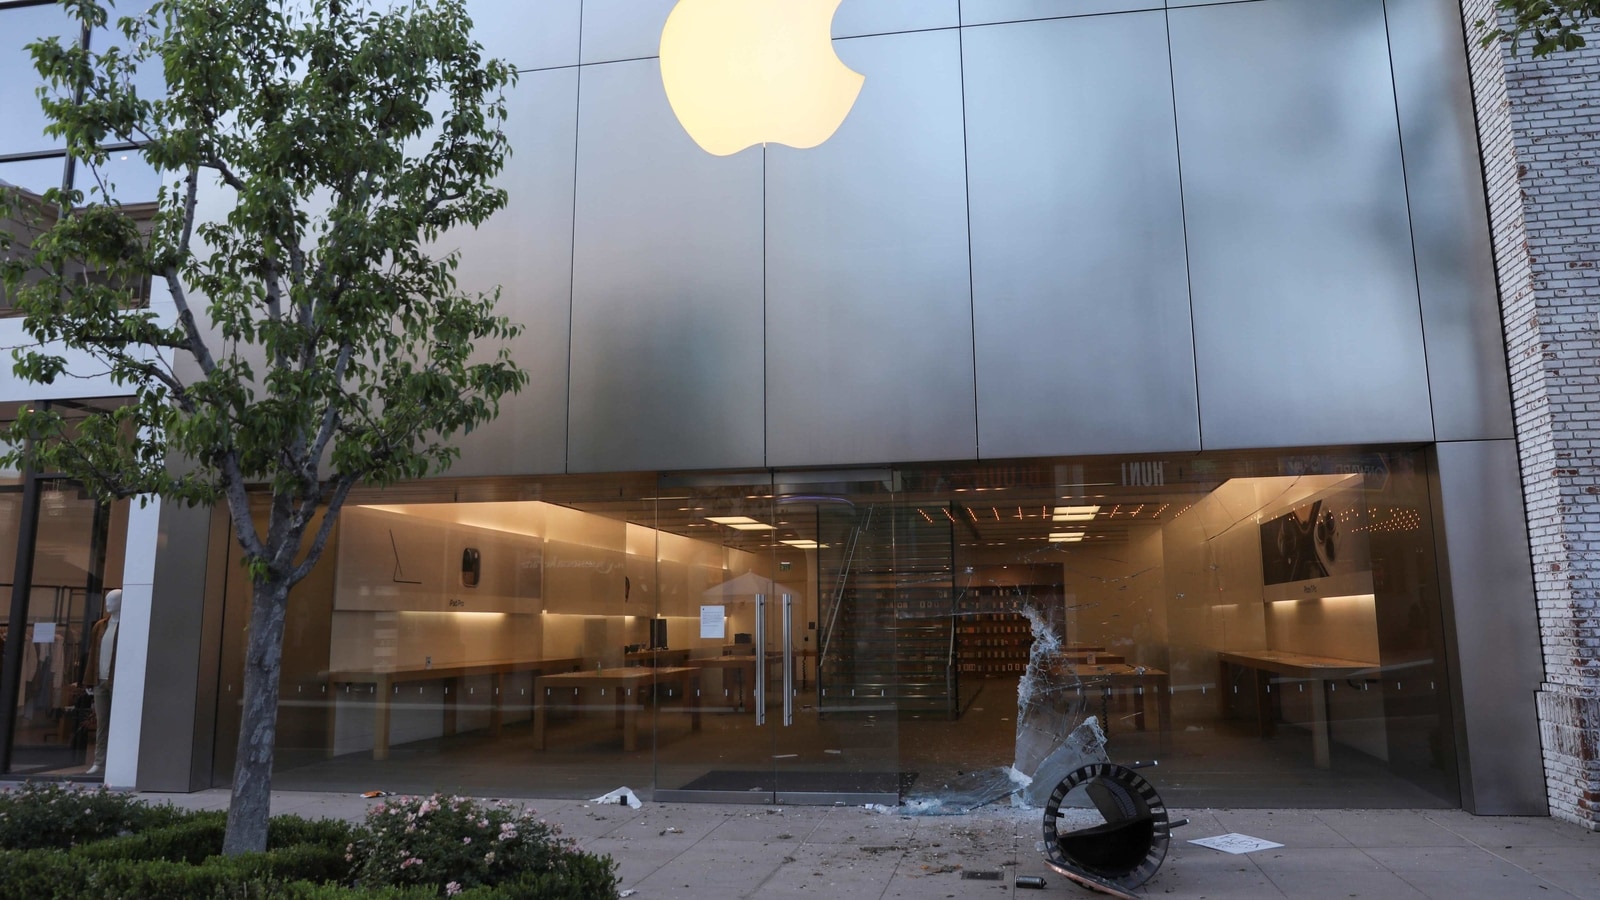 Apple permanently closes Minneapolis store, suffers fire at Las